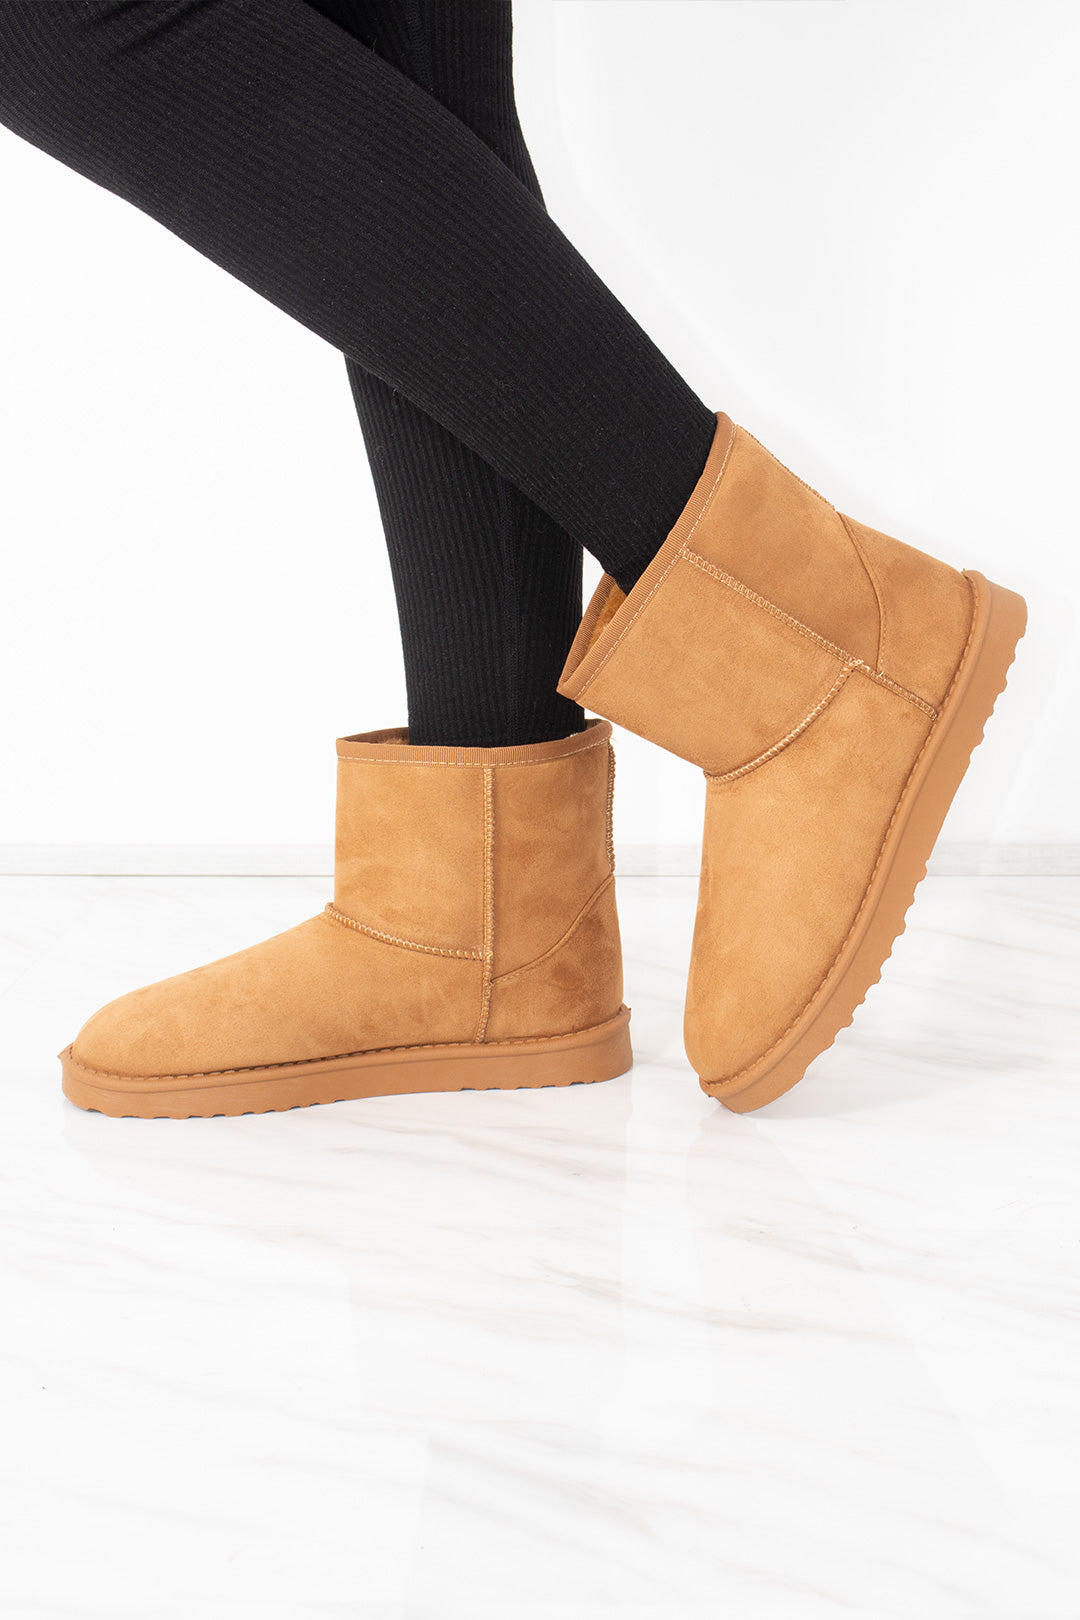 Camel Faux Suede Fur Lined Mini Ankle Boots